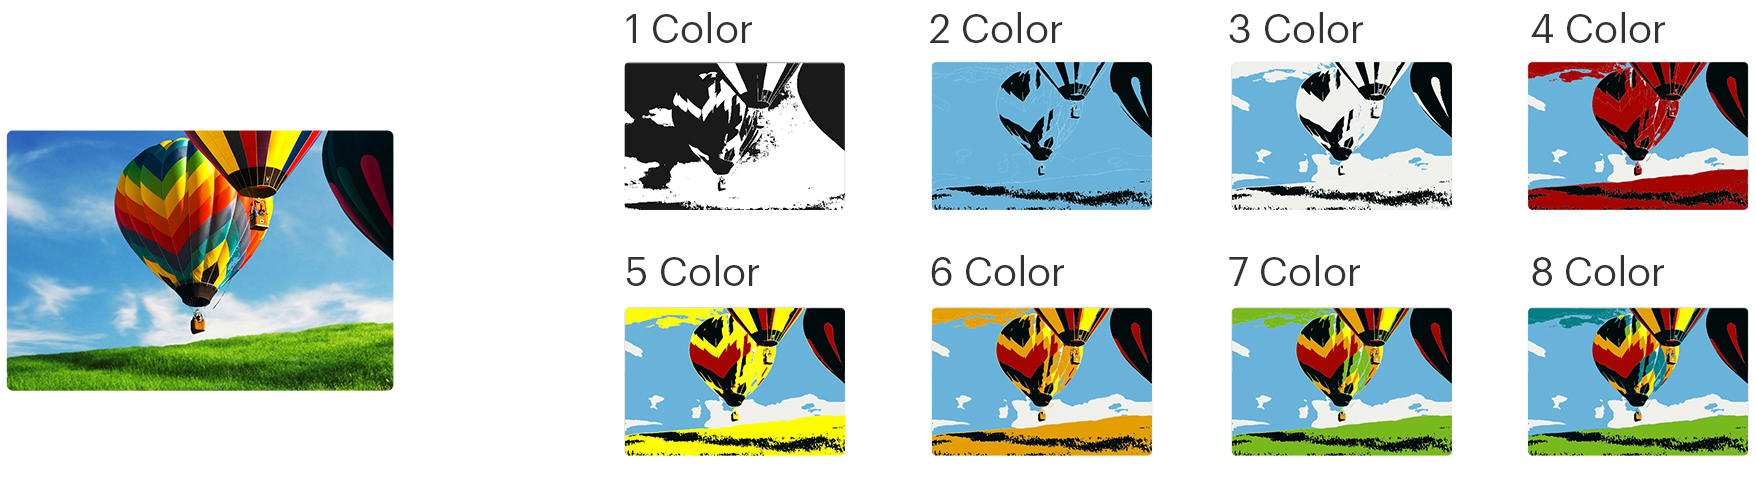 Vectorize image to detect or remove colors